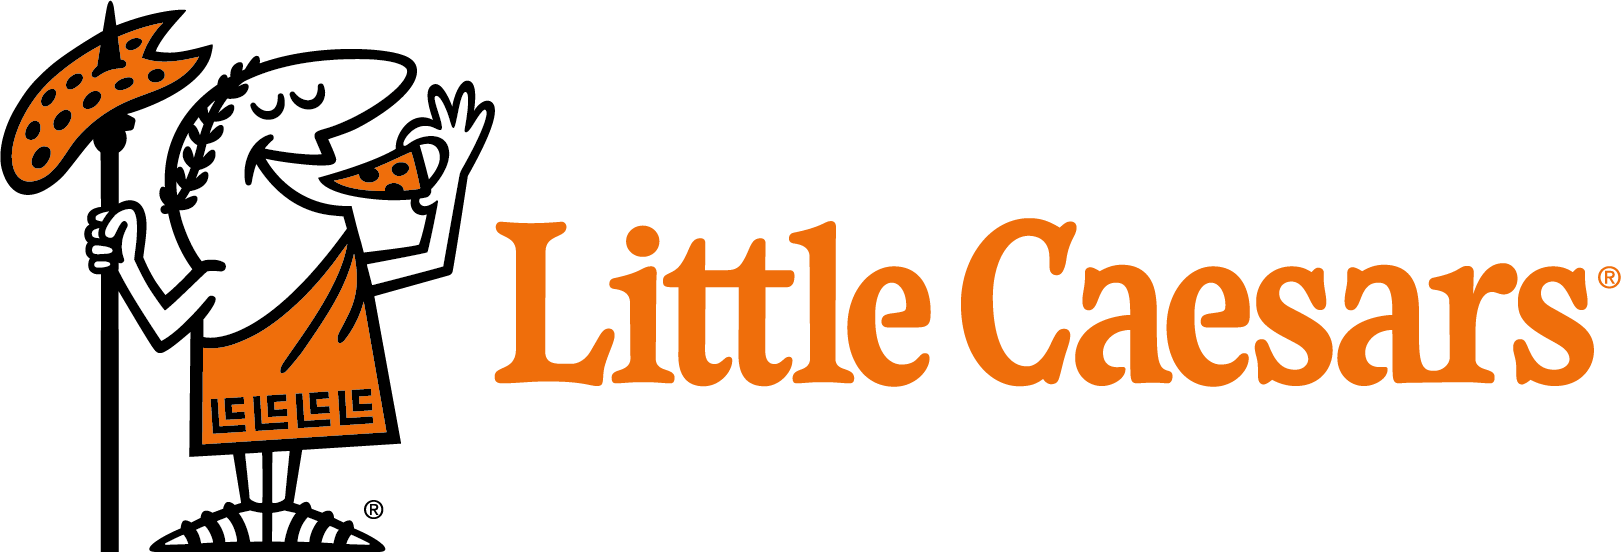 Download Little Caesars Logo Nuevo Clipart Png Download Pikpng